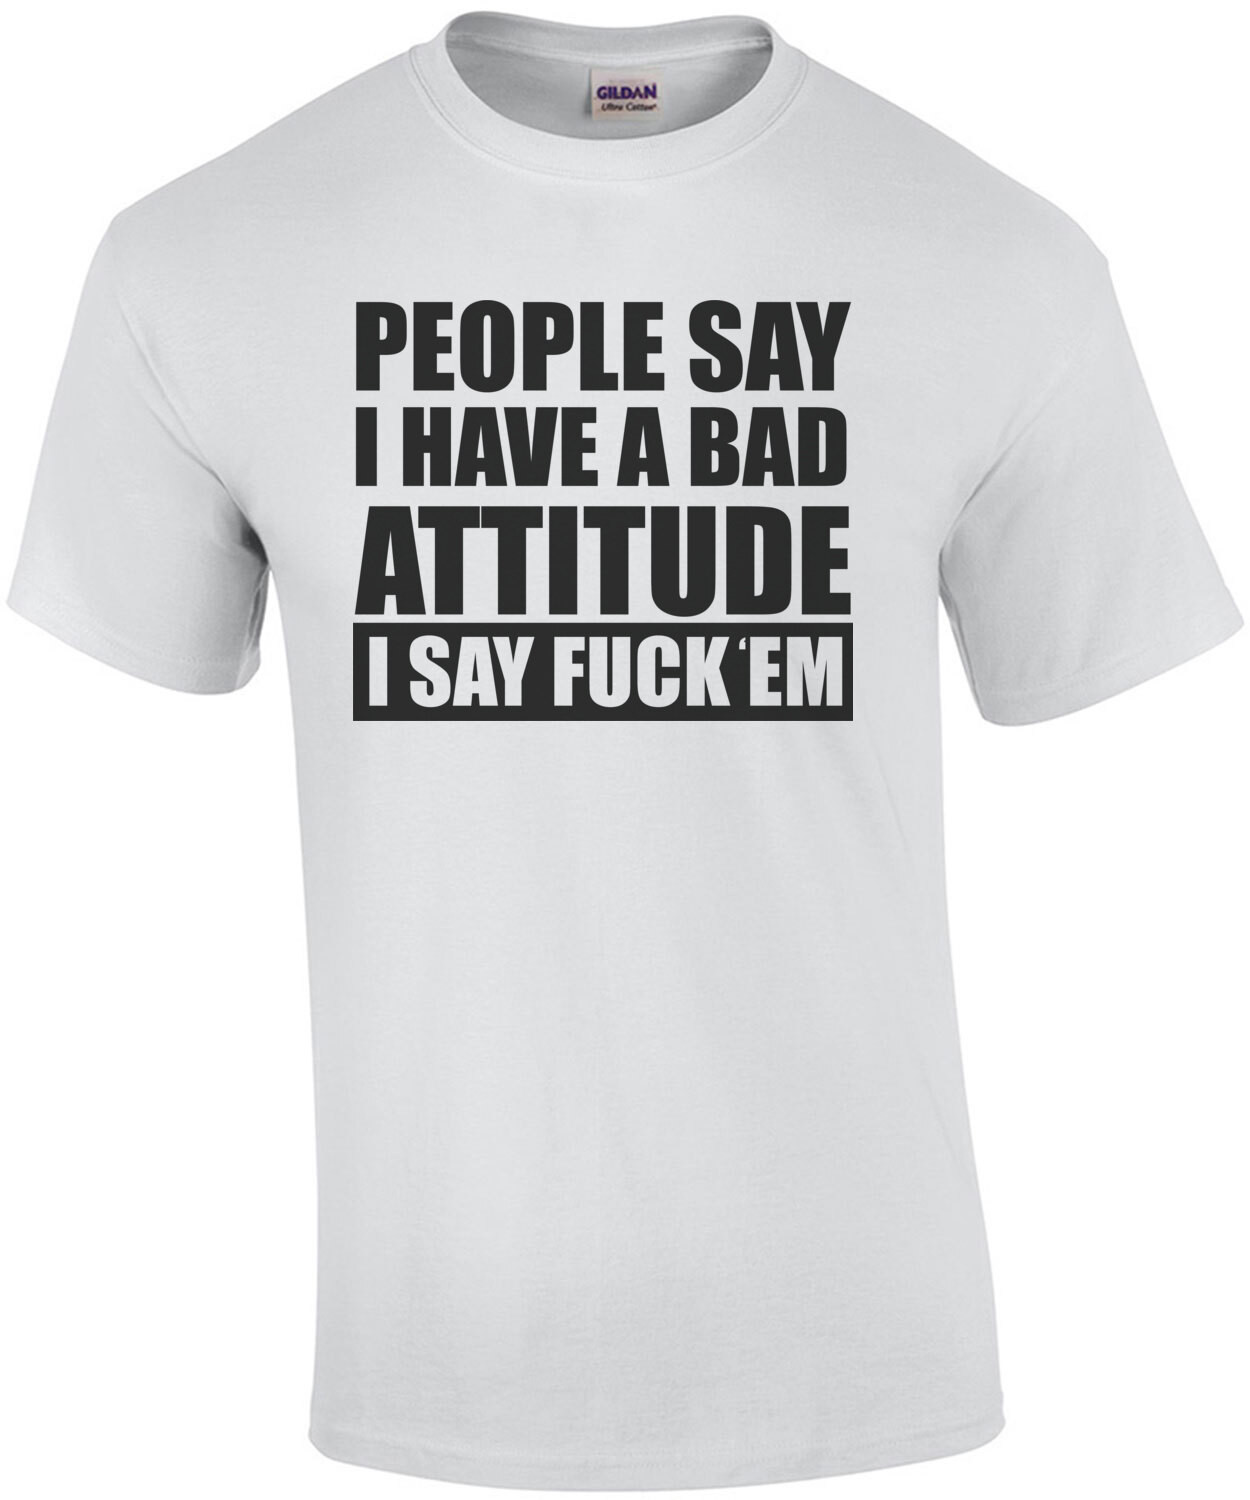 People say I have a bad attitude - I say fuck 'em - funny offensive rude t-shirt